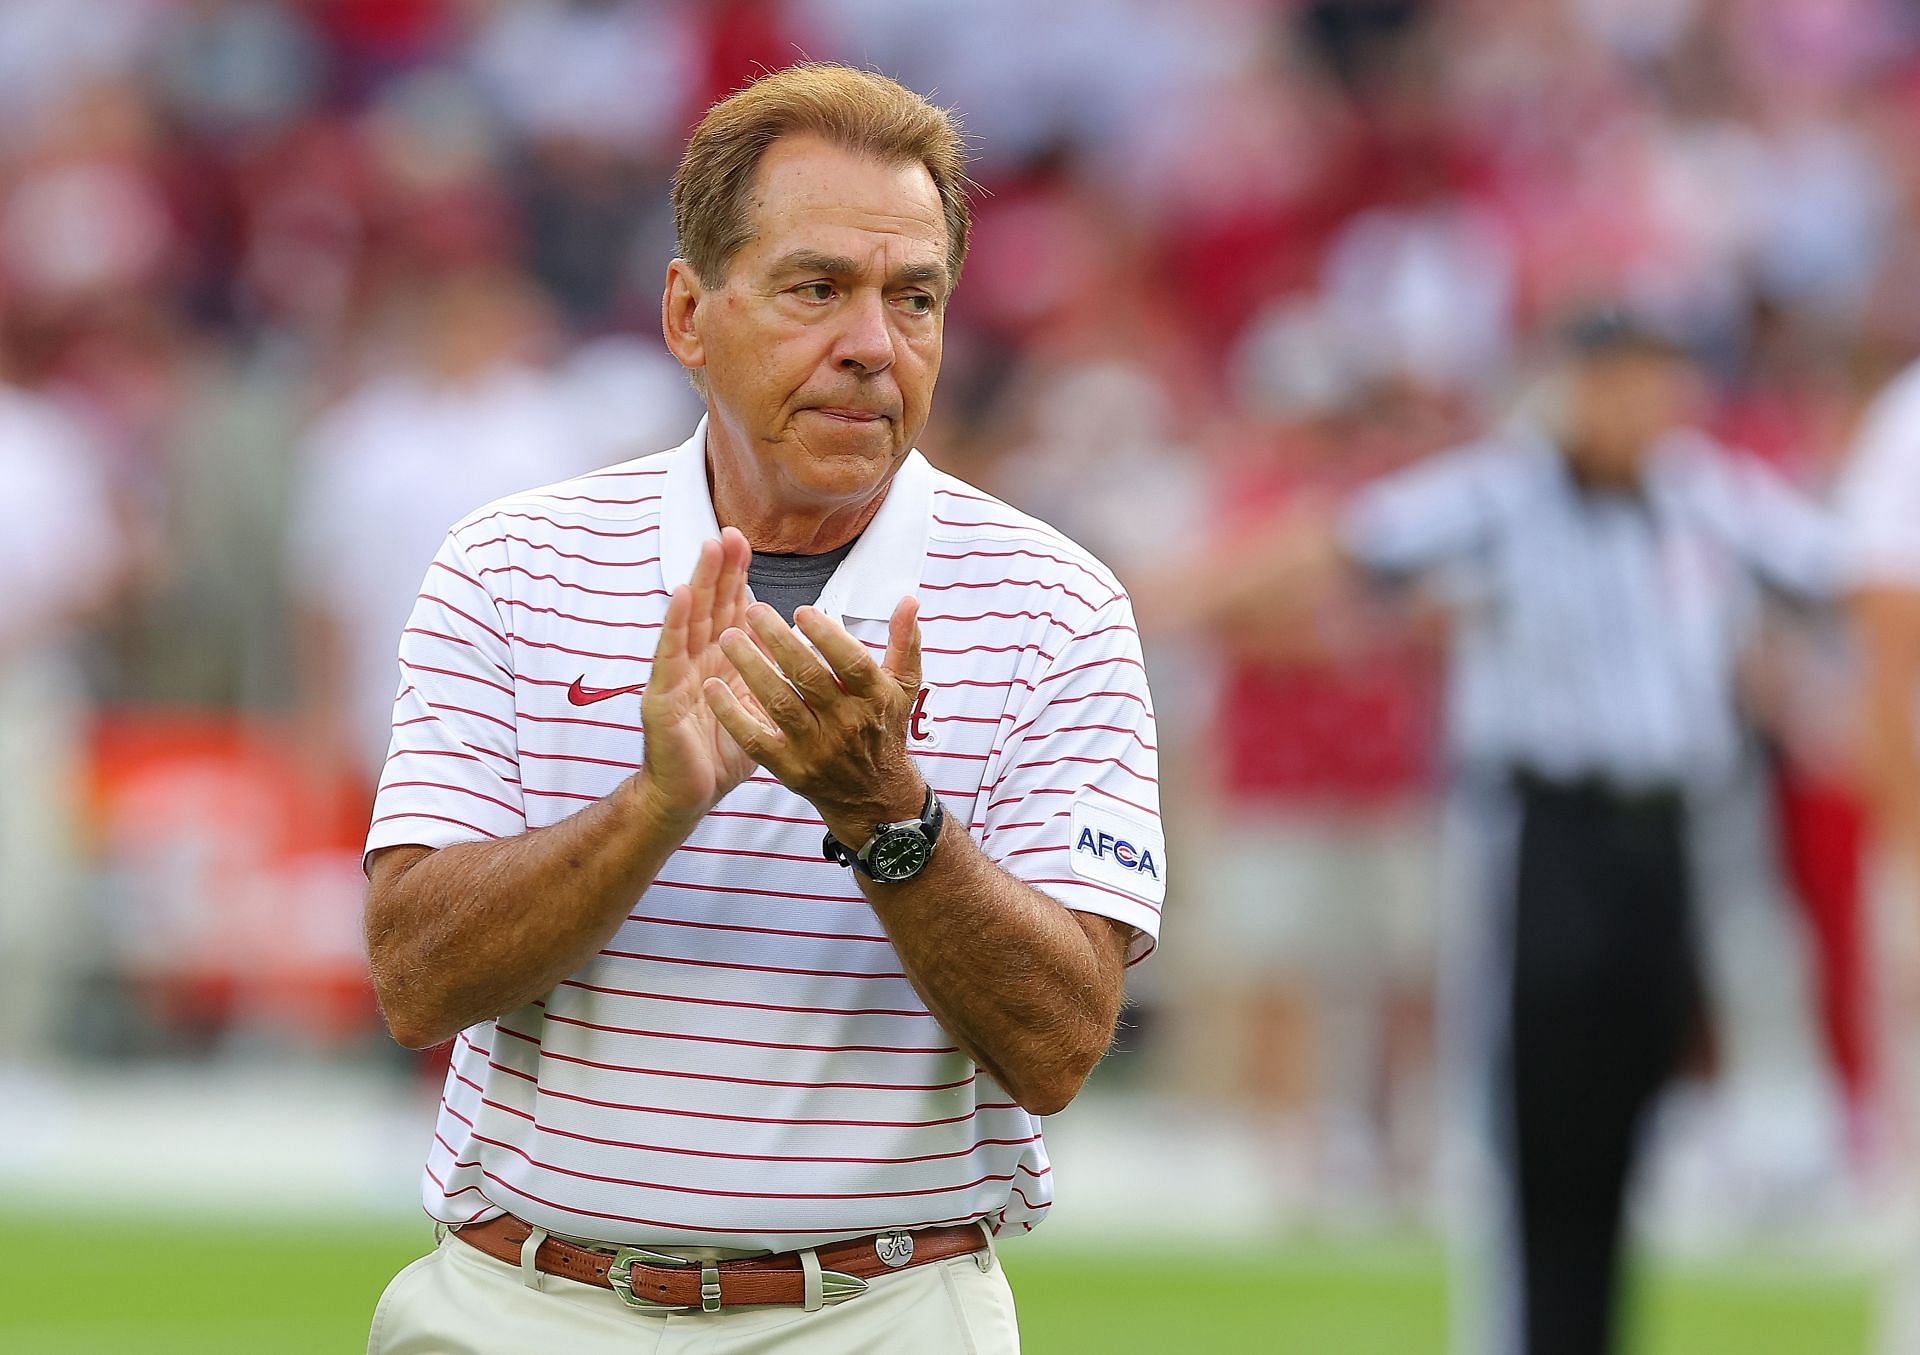 Top 5 oldest college football coaches feat. Nick Saban